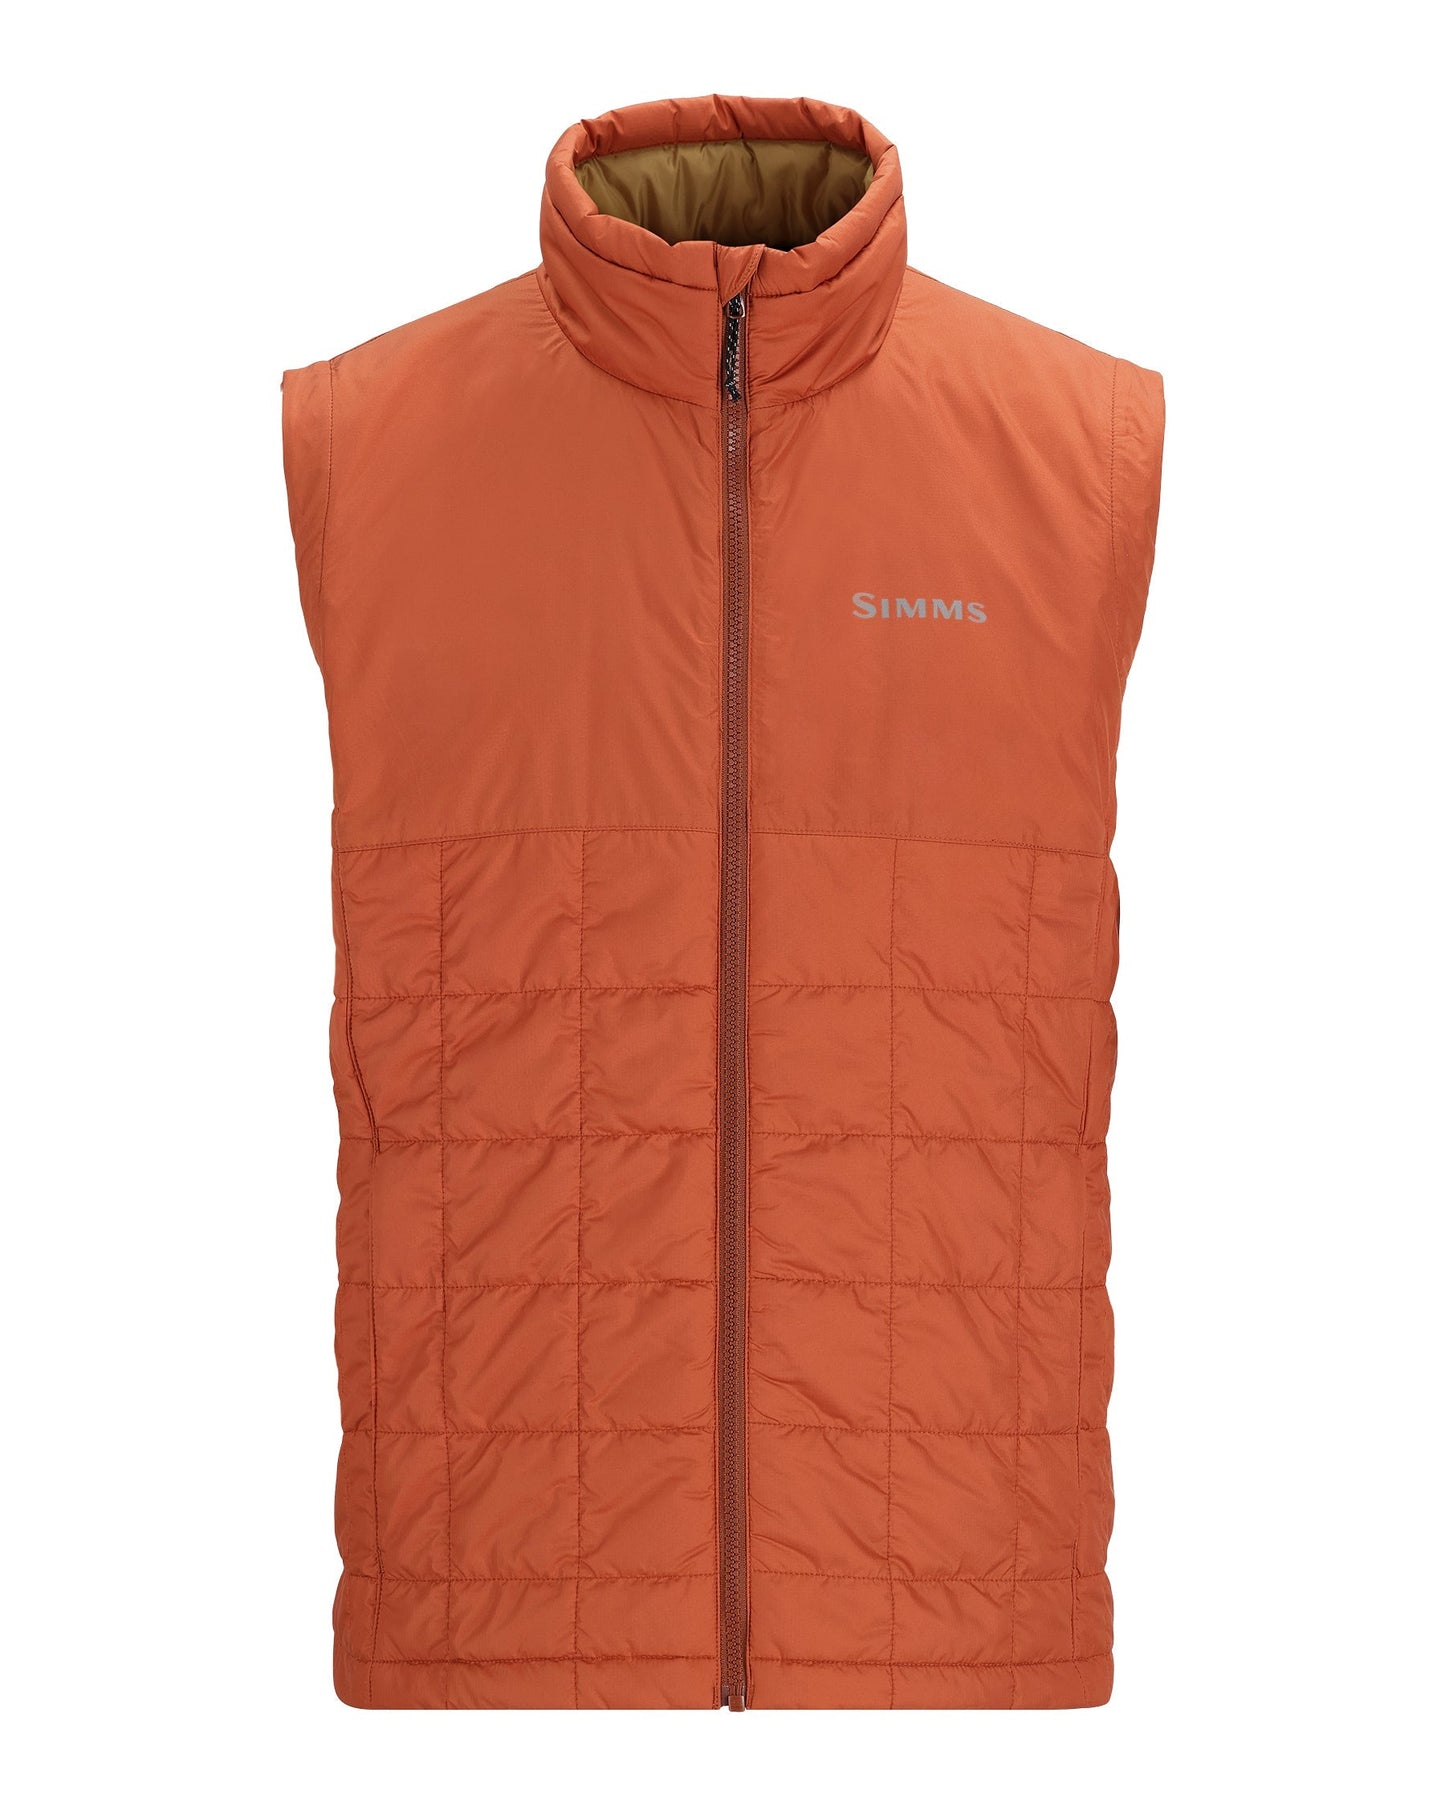 M'S FALL RUN VEST CLAY -on-mannequin